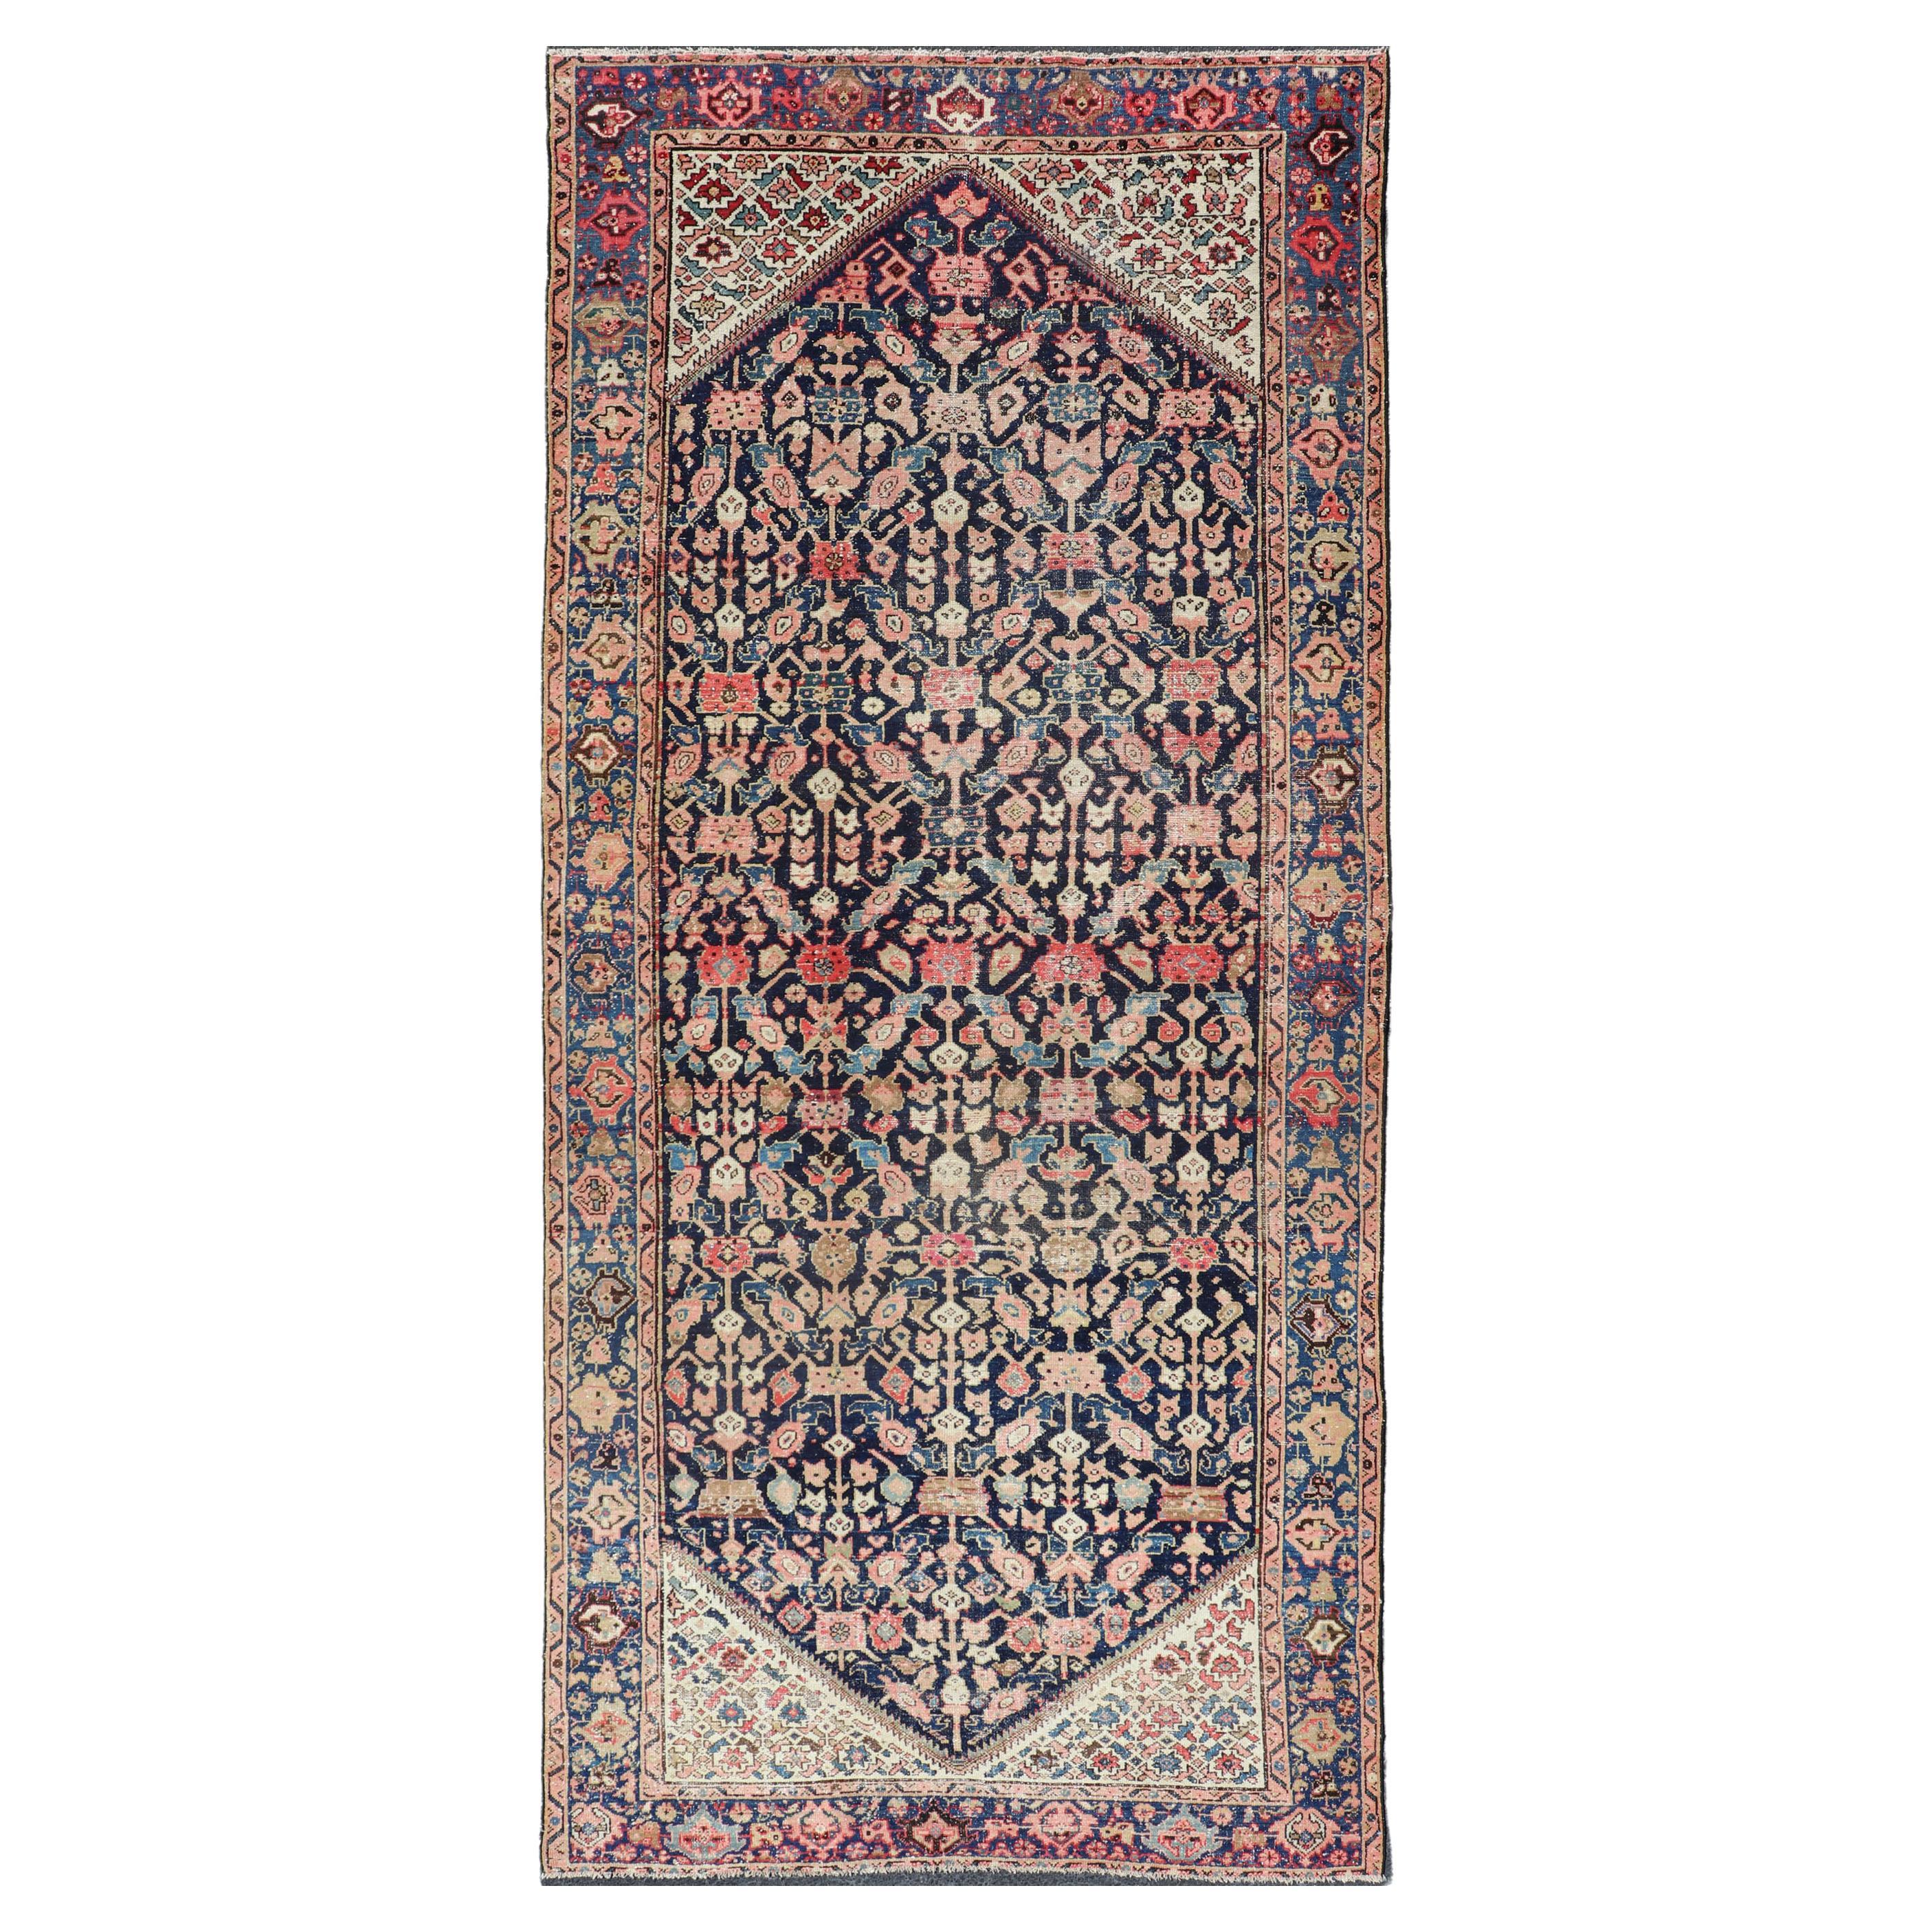 Antique Persian Malayer Gallery Rug with Geometric All-Over Herati Design